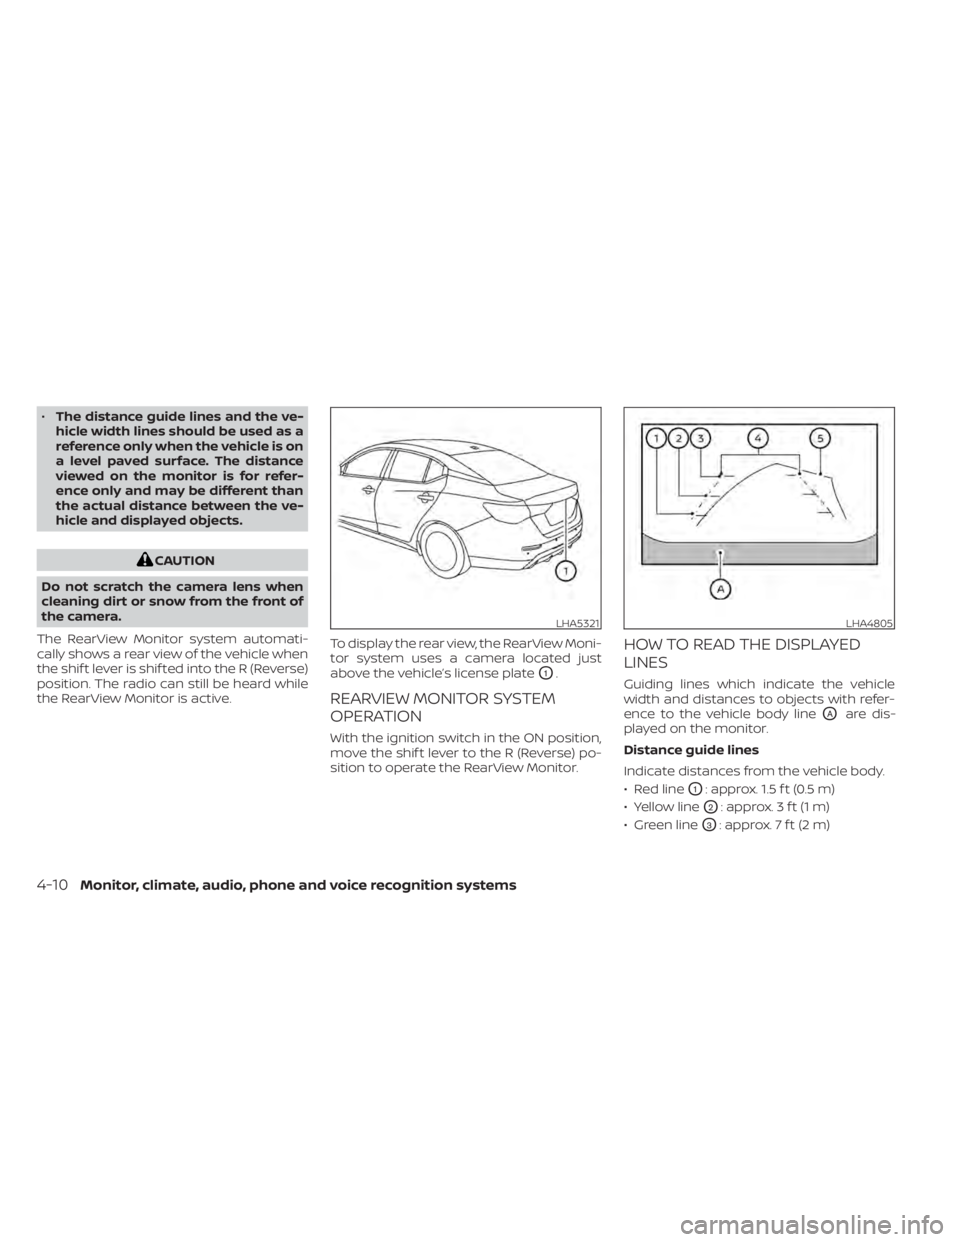 NISSAN SENTRA 2021 User Guide •The distance guide lines and the ve-
hicle width lines should be used as a
reference only when the vehicle is on
a level paved surface. The distance
viewed on the monitor is for refer-
ence only an